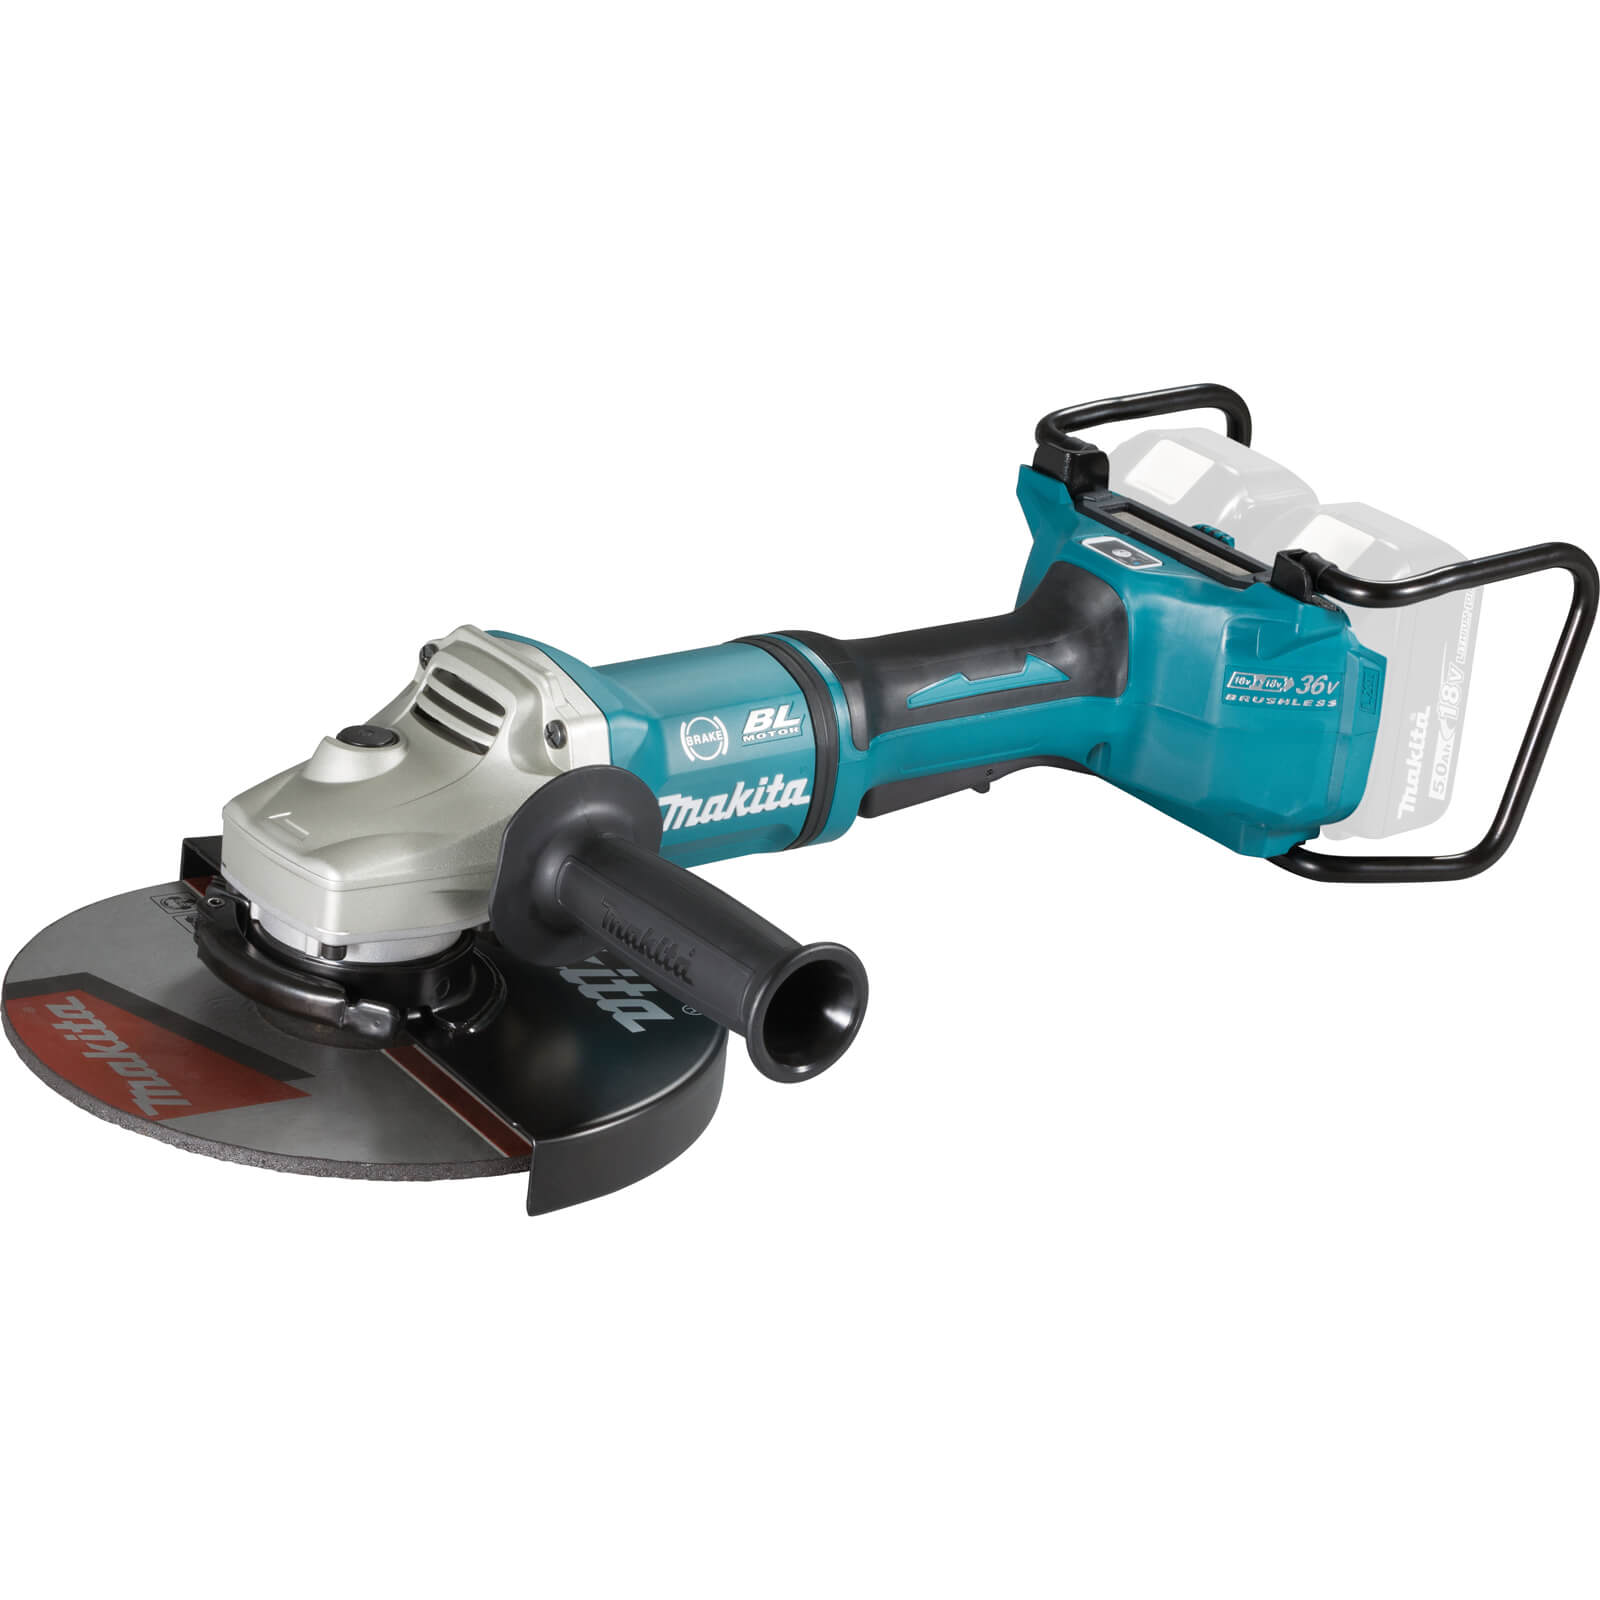 Makita DGA901ZUX2 Twin 18v LXT Cordless Brushless Angle Grinder 230mm No Batteries No Charger No Case